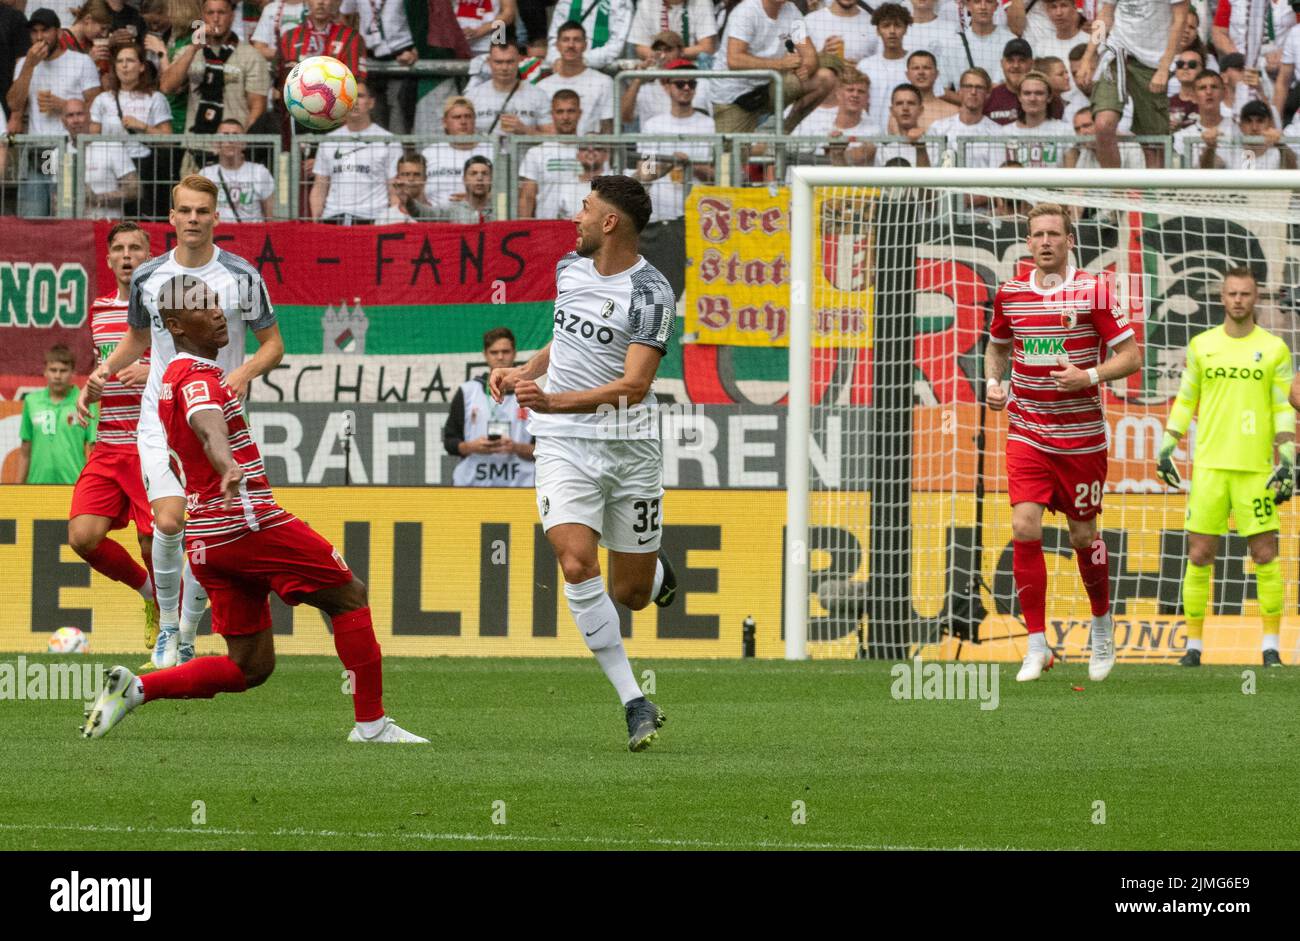 06 August 2022, Bavaria, Augsburg: Soccer, Bundesliga, FC Augsburg - SC Freiburg, Matchday 1, WWK-Arena. Augsburg's Carlos Gruezo (l) loses out to Freiburg's Vincnzo Grifo. Photo: Stefan Puchner/dpa - IMPORTANT NOTE: In accordance with the requirements of the DFL Deutsche Fußball Liga and the DFB Deutscher Fußball-Bund, it is prohibited to use or have used photographs taken in the stadium and/or of the match in the form of sequence pictures and/or video-like photo series. Stock Photo